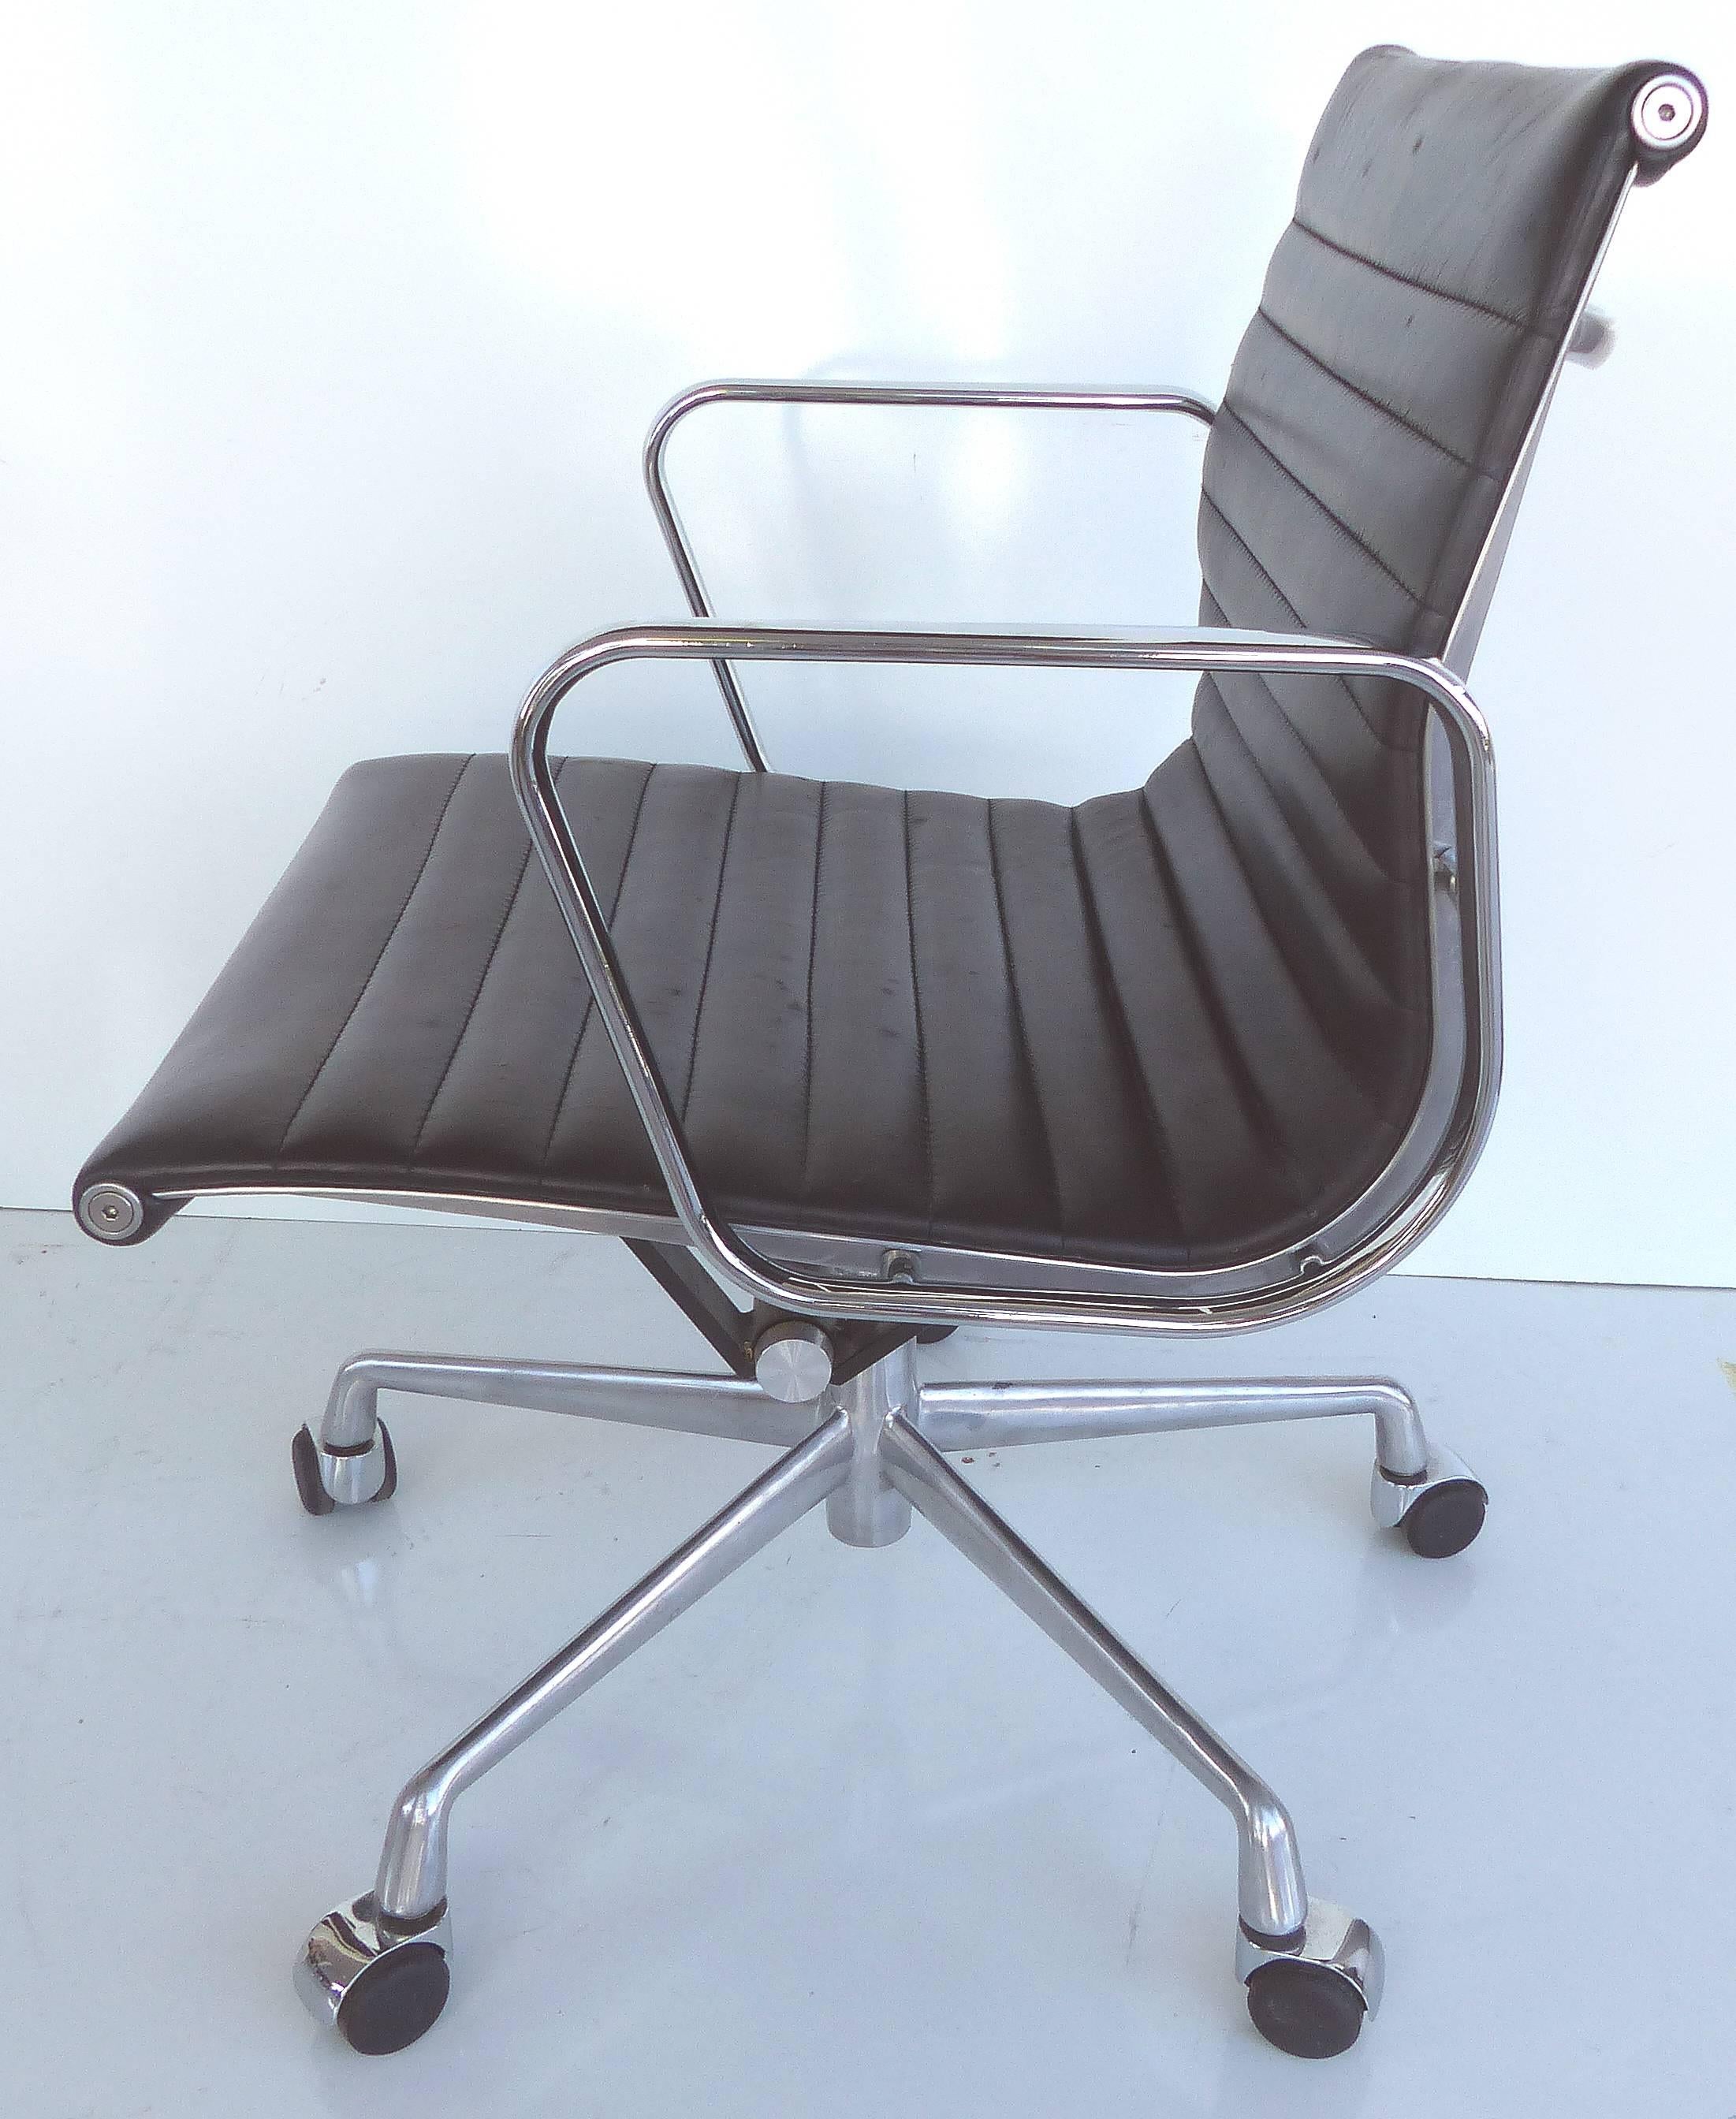 American Mid-Century Modern Eames Leather Desk Chair